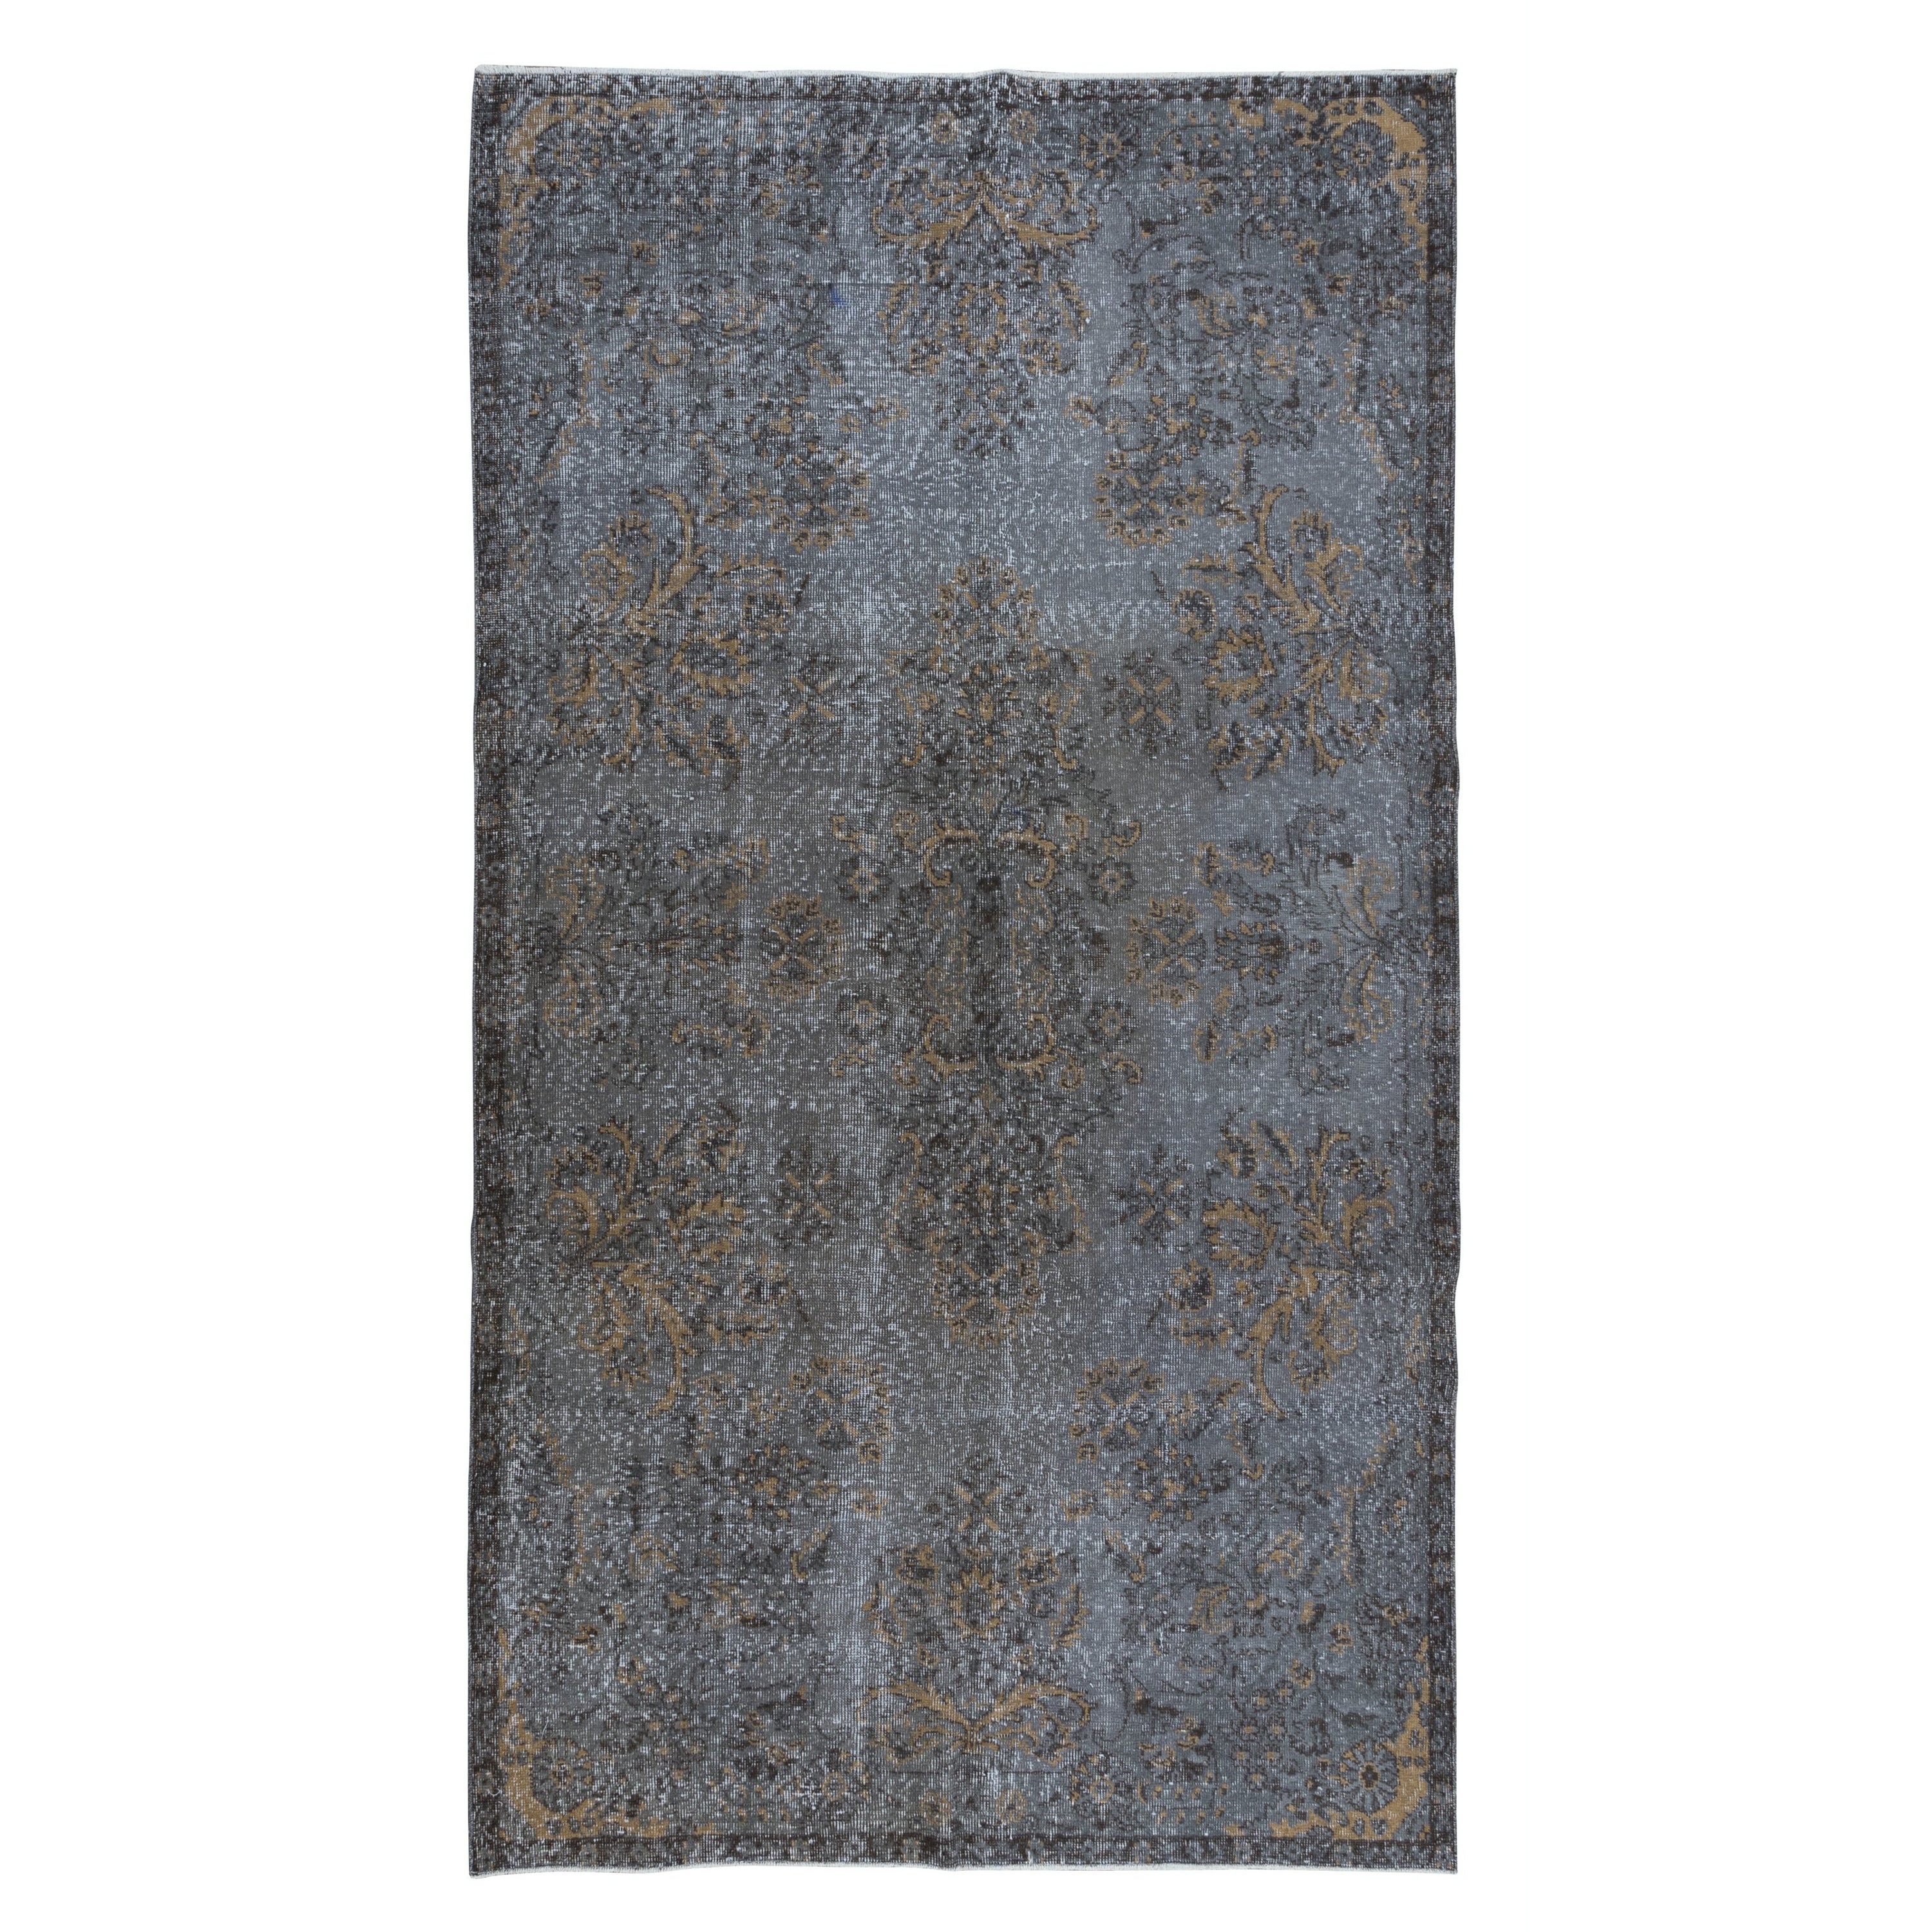 5.6x10 Ft Handmade Room Size Rug, Upcycled Turkish Carpet in Gray & Beige